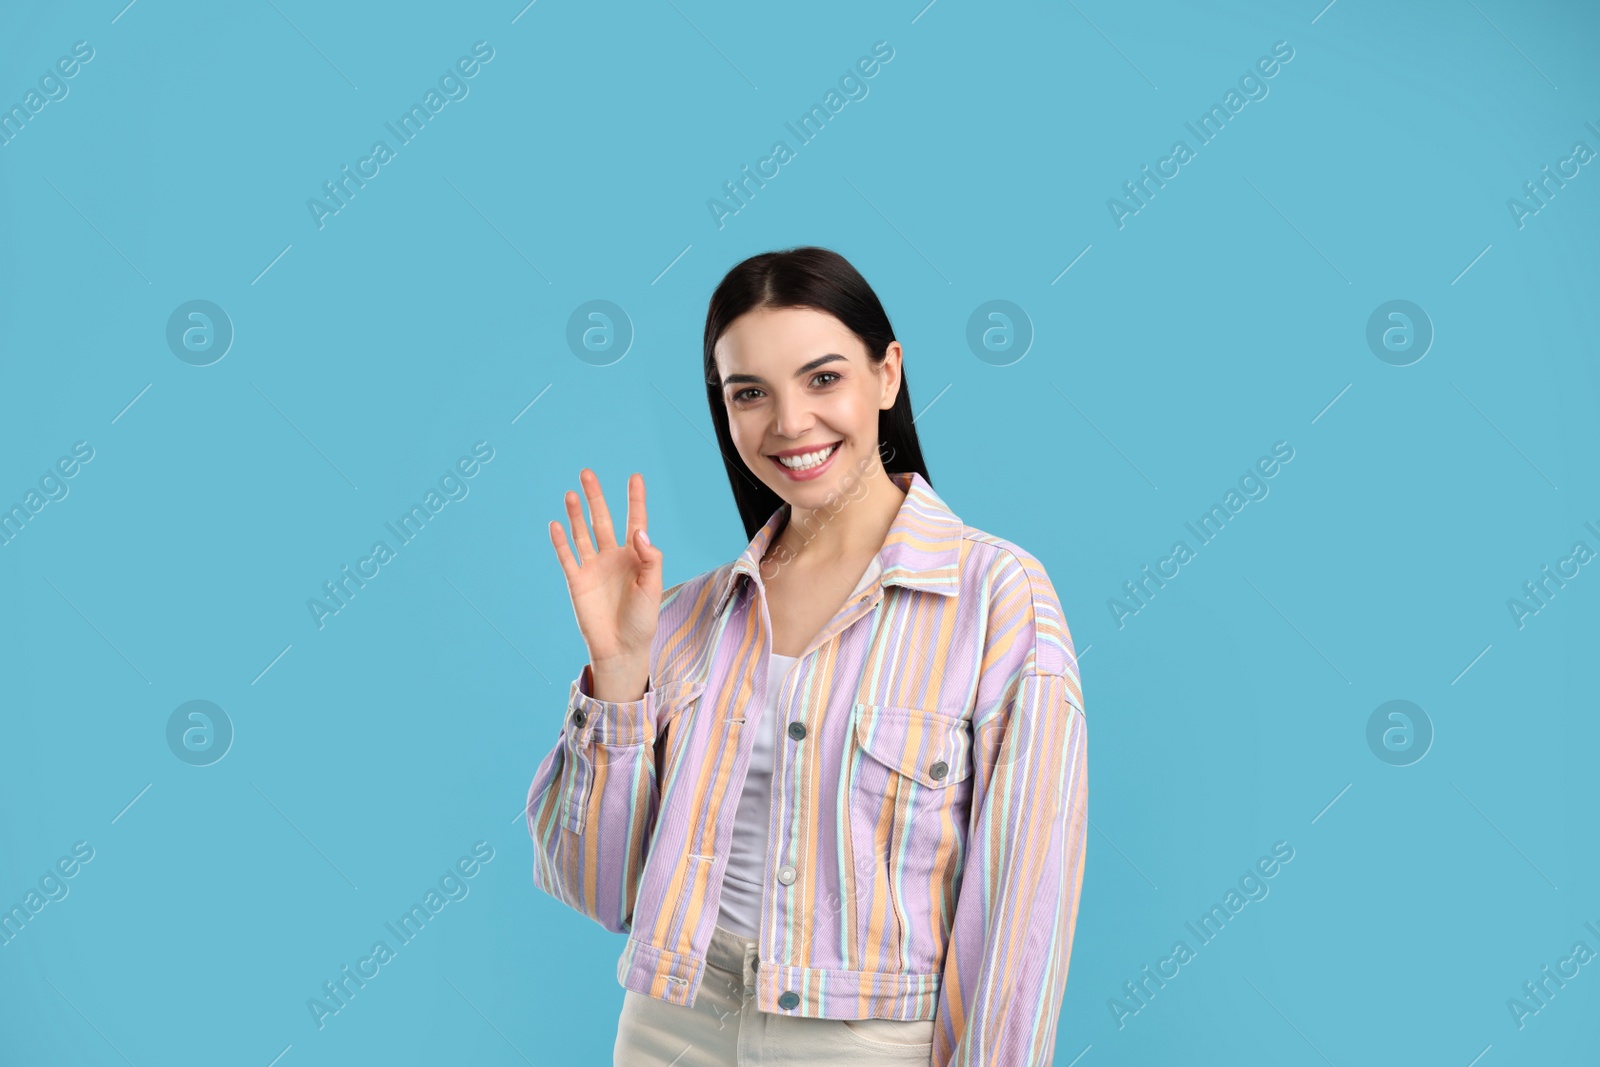 Photo of Attractive young woman showing hello gesture on light blue background